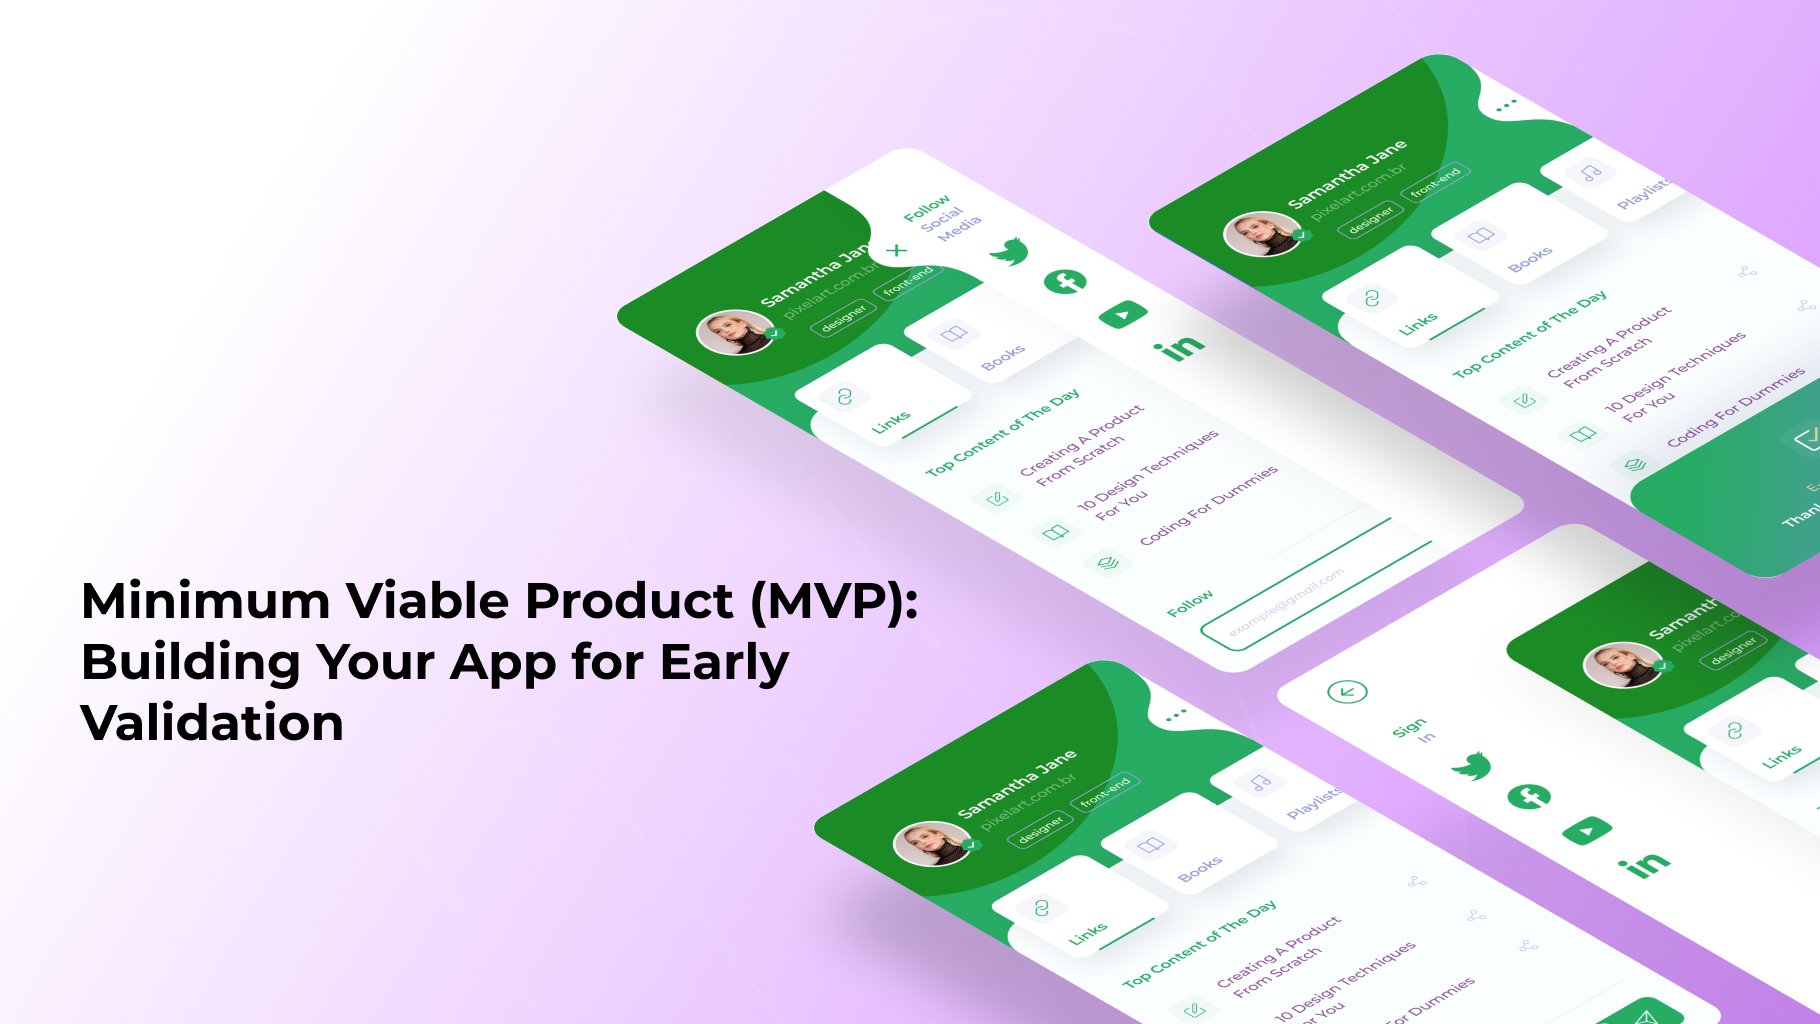 Minimum Viable Product (MVP): Building Your App for Early Validation